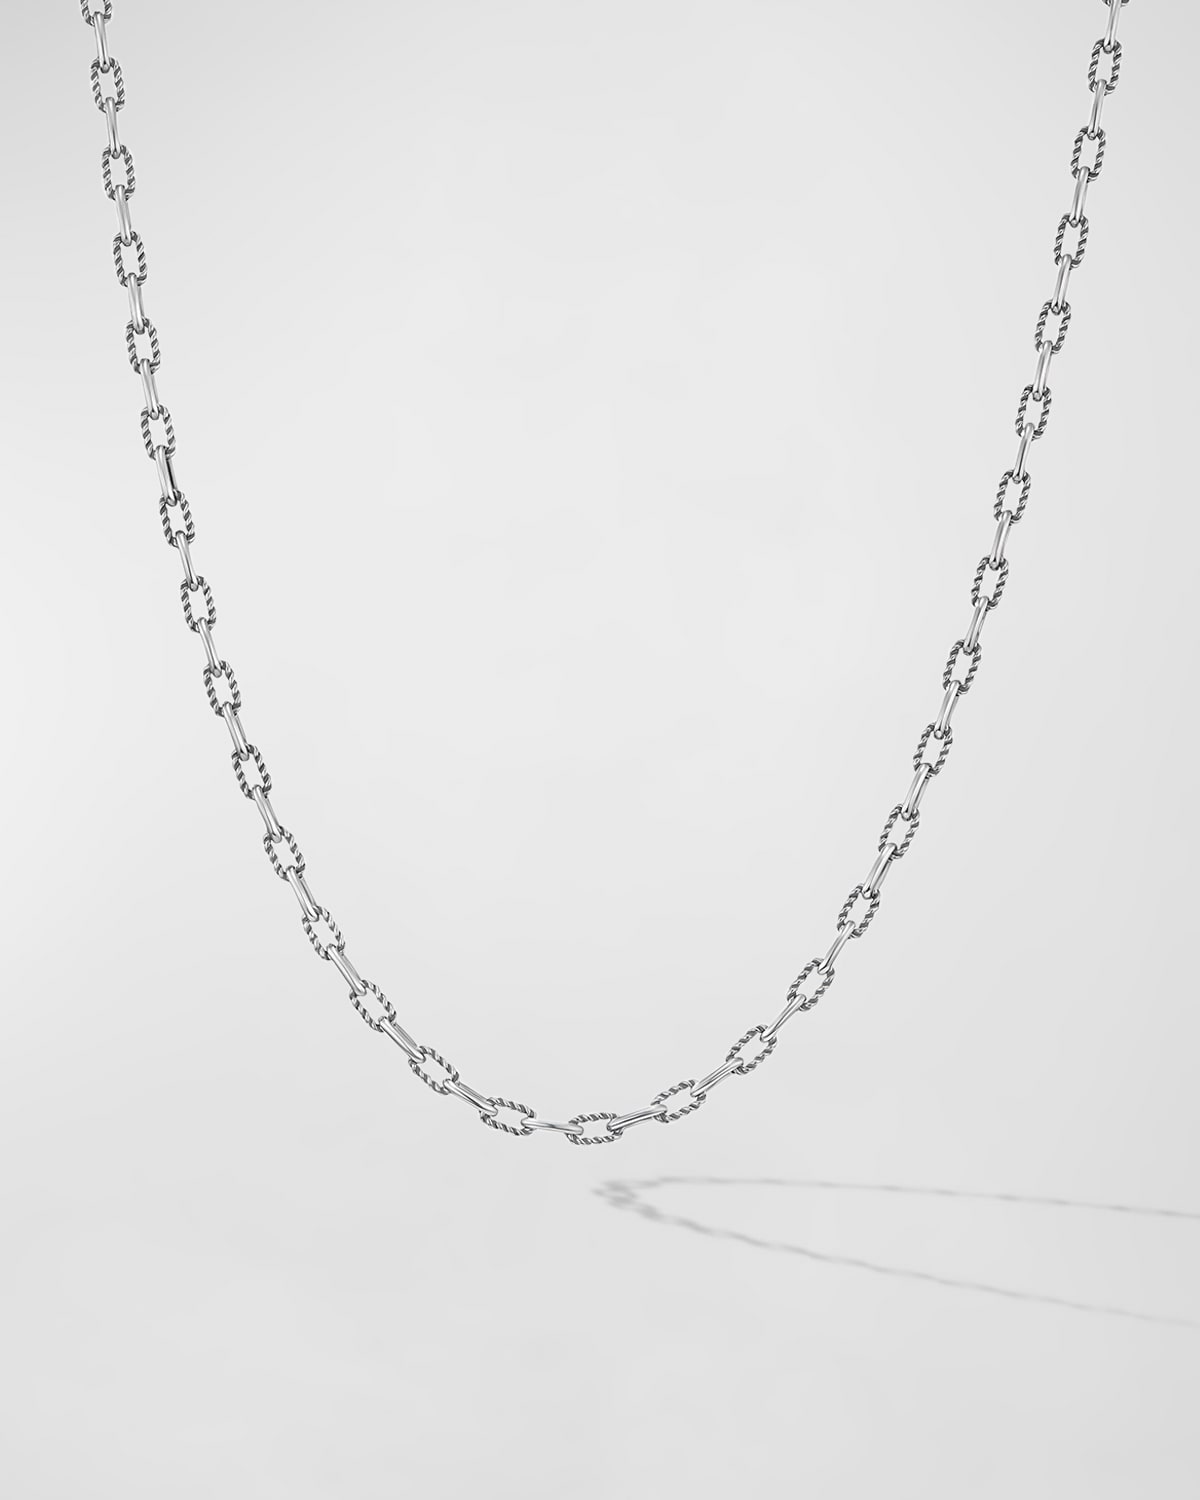 David Yurman Men's DY Madison Chain Necklace in Silver, 3mm, 22"L